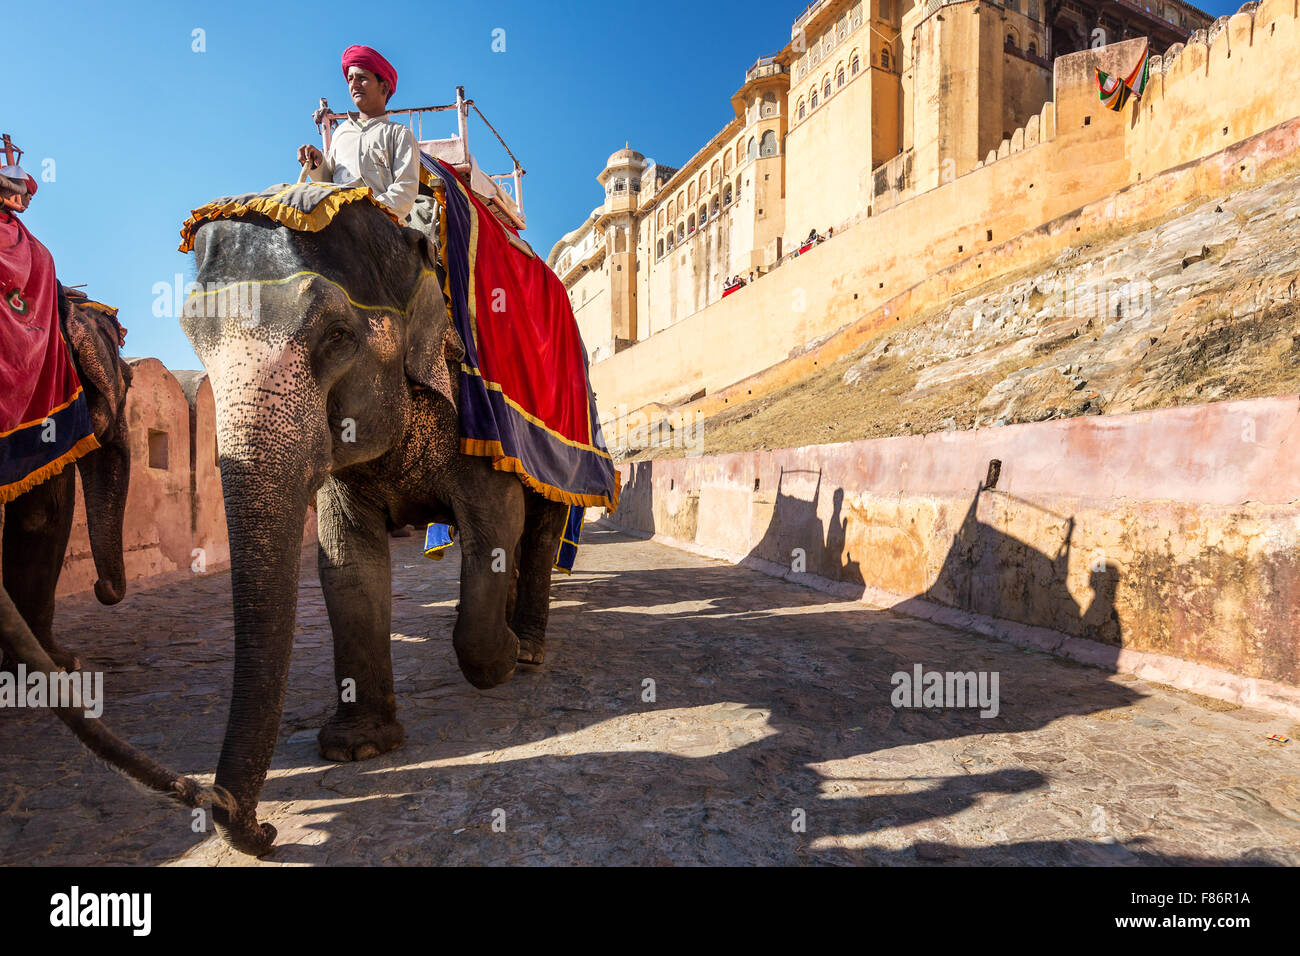 Elephants riding for tourists at Amber Fort, Jaipur, Rajasthan, India Stock Photo